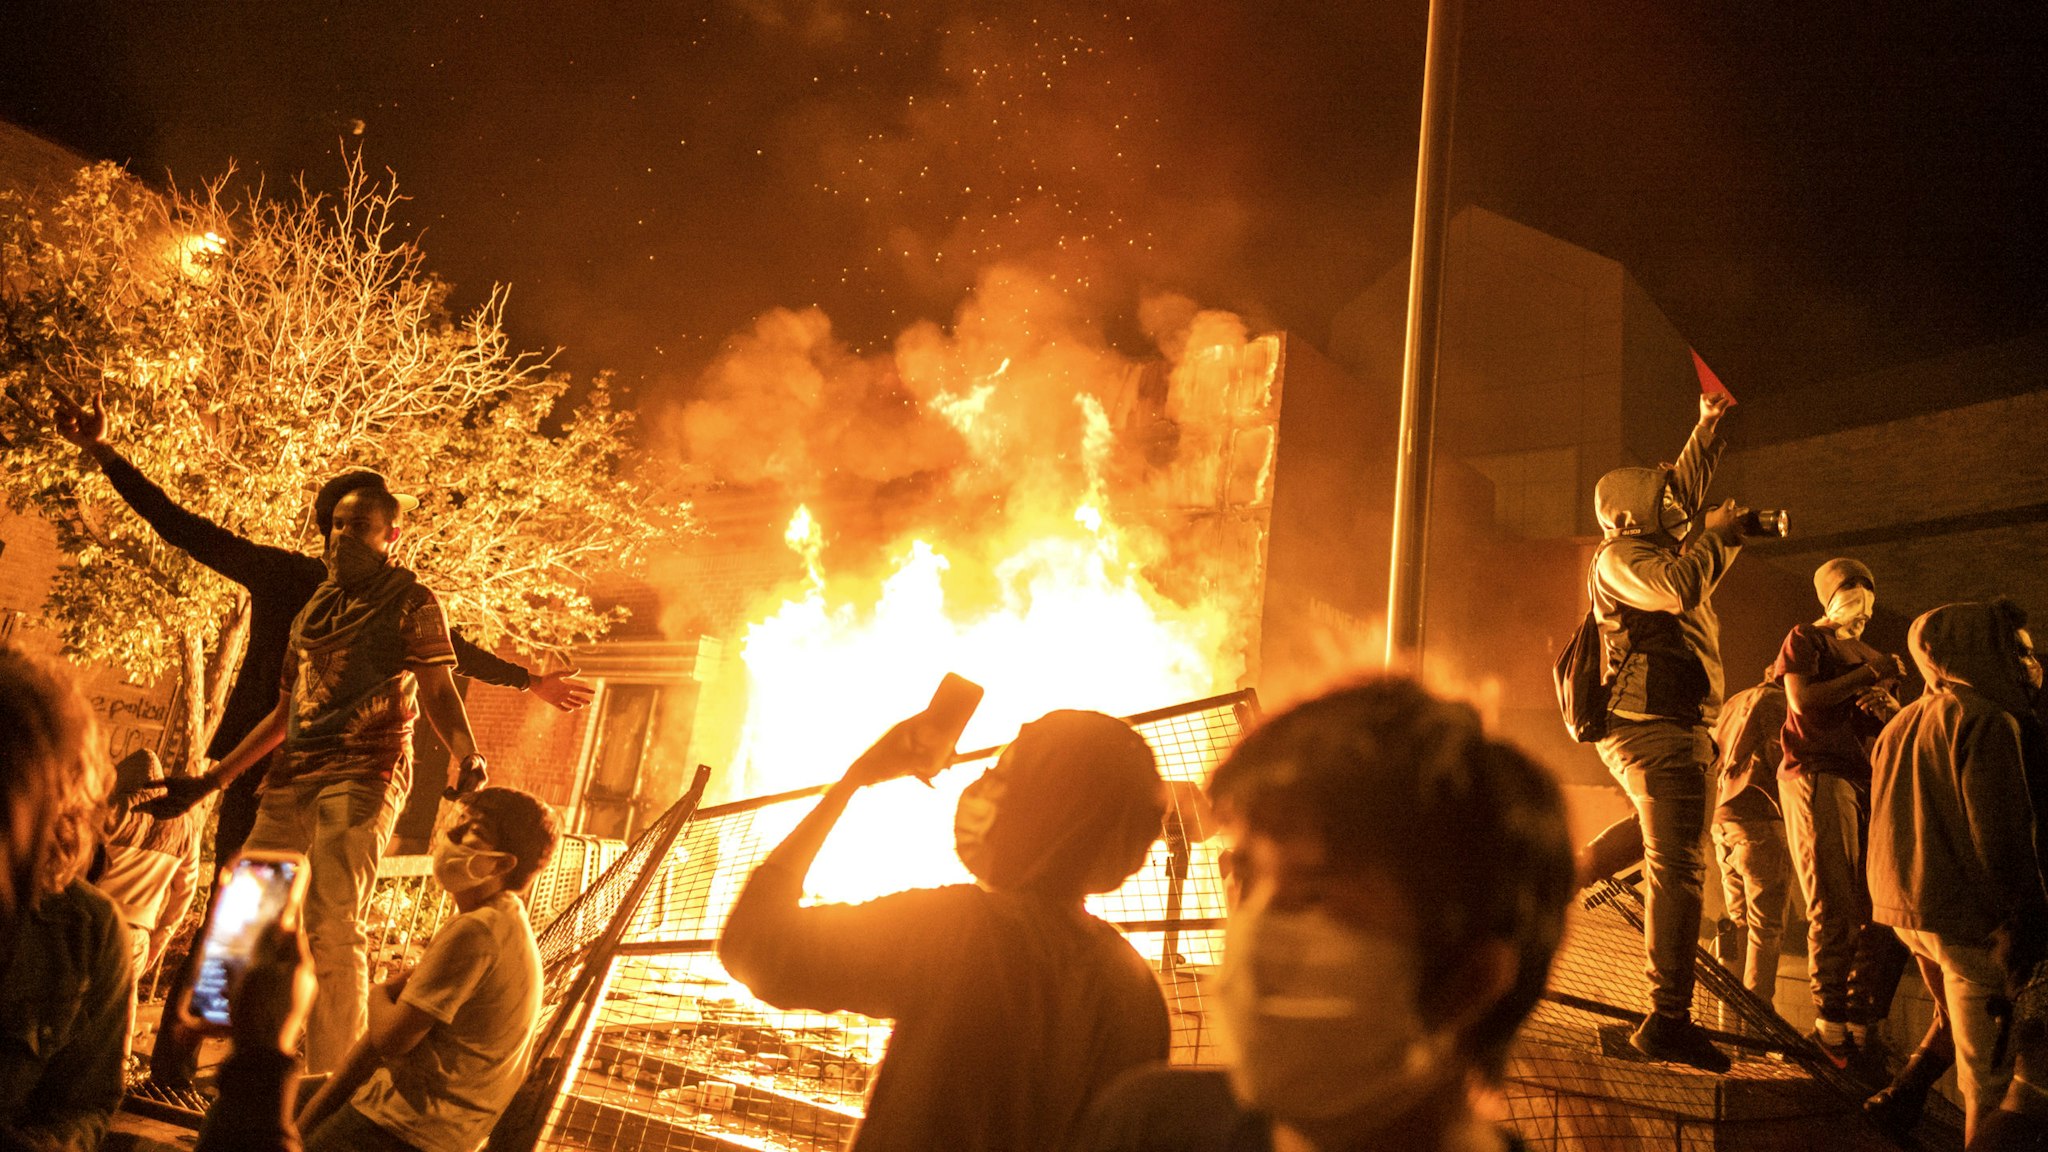 Minneapolis, MN May 28: The Minneapolis 3rd Police Precinct was set on fire by protesters after being evacuated on Thursday night.